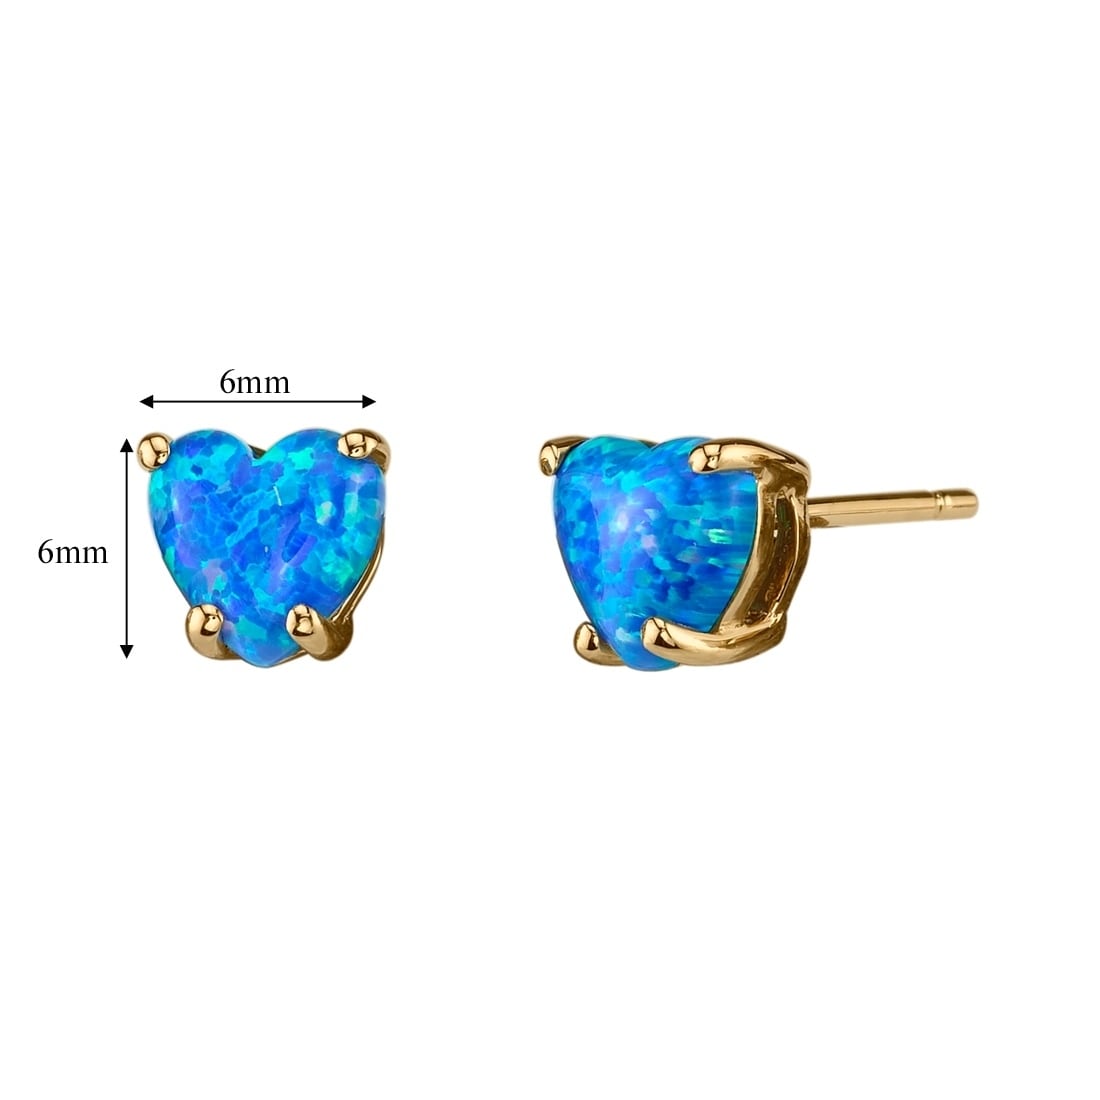 14K Solid Yellow Gold 7mm Square Blue Opal Push-Back Solitaire Stud Earrings